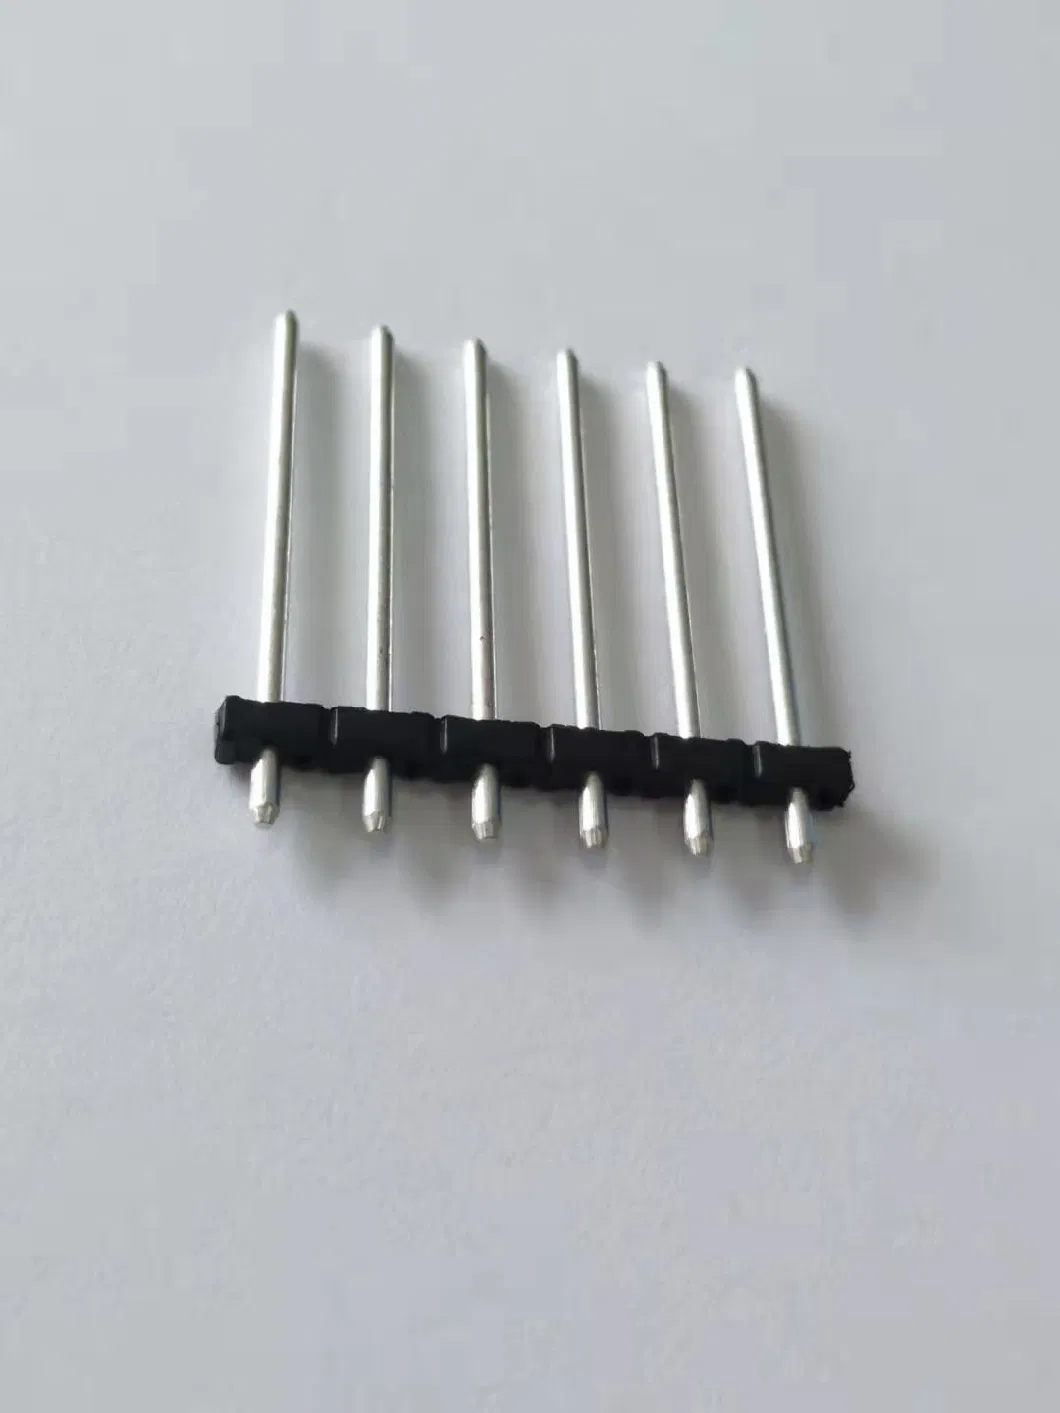 Customizable Matching Terminal Blocks Pitch 5.0mm PCB Connector Vertical Male Header Pin Header